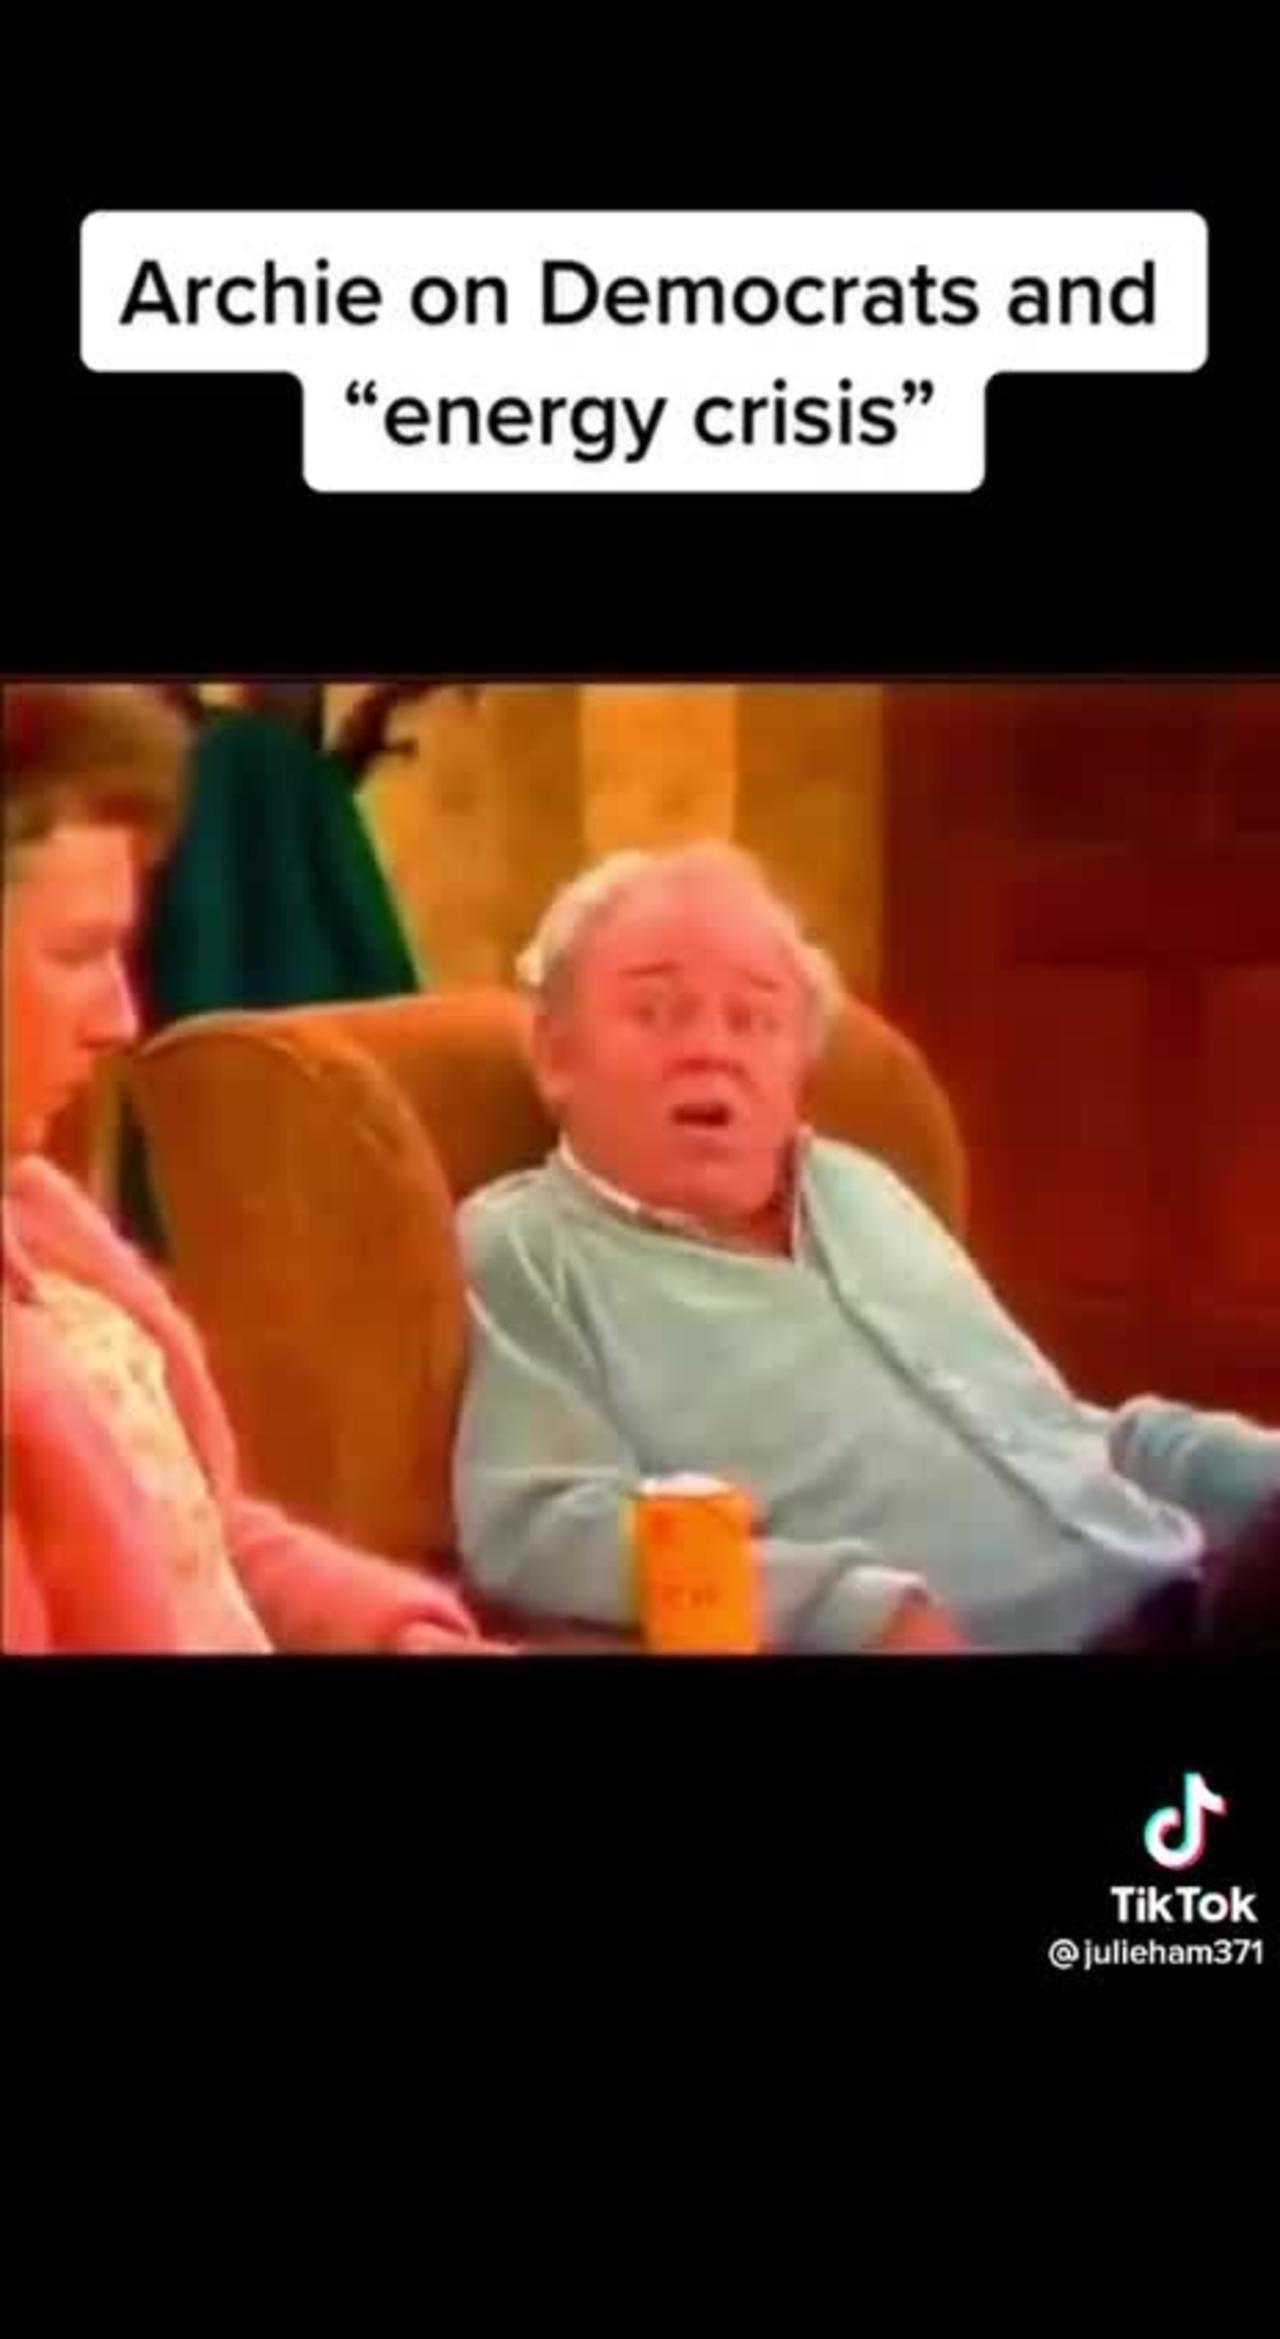 Archie Bunker on Climate Change